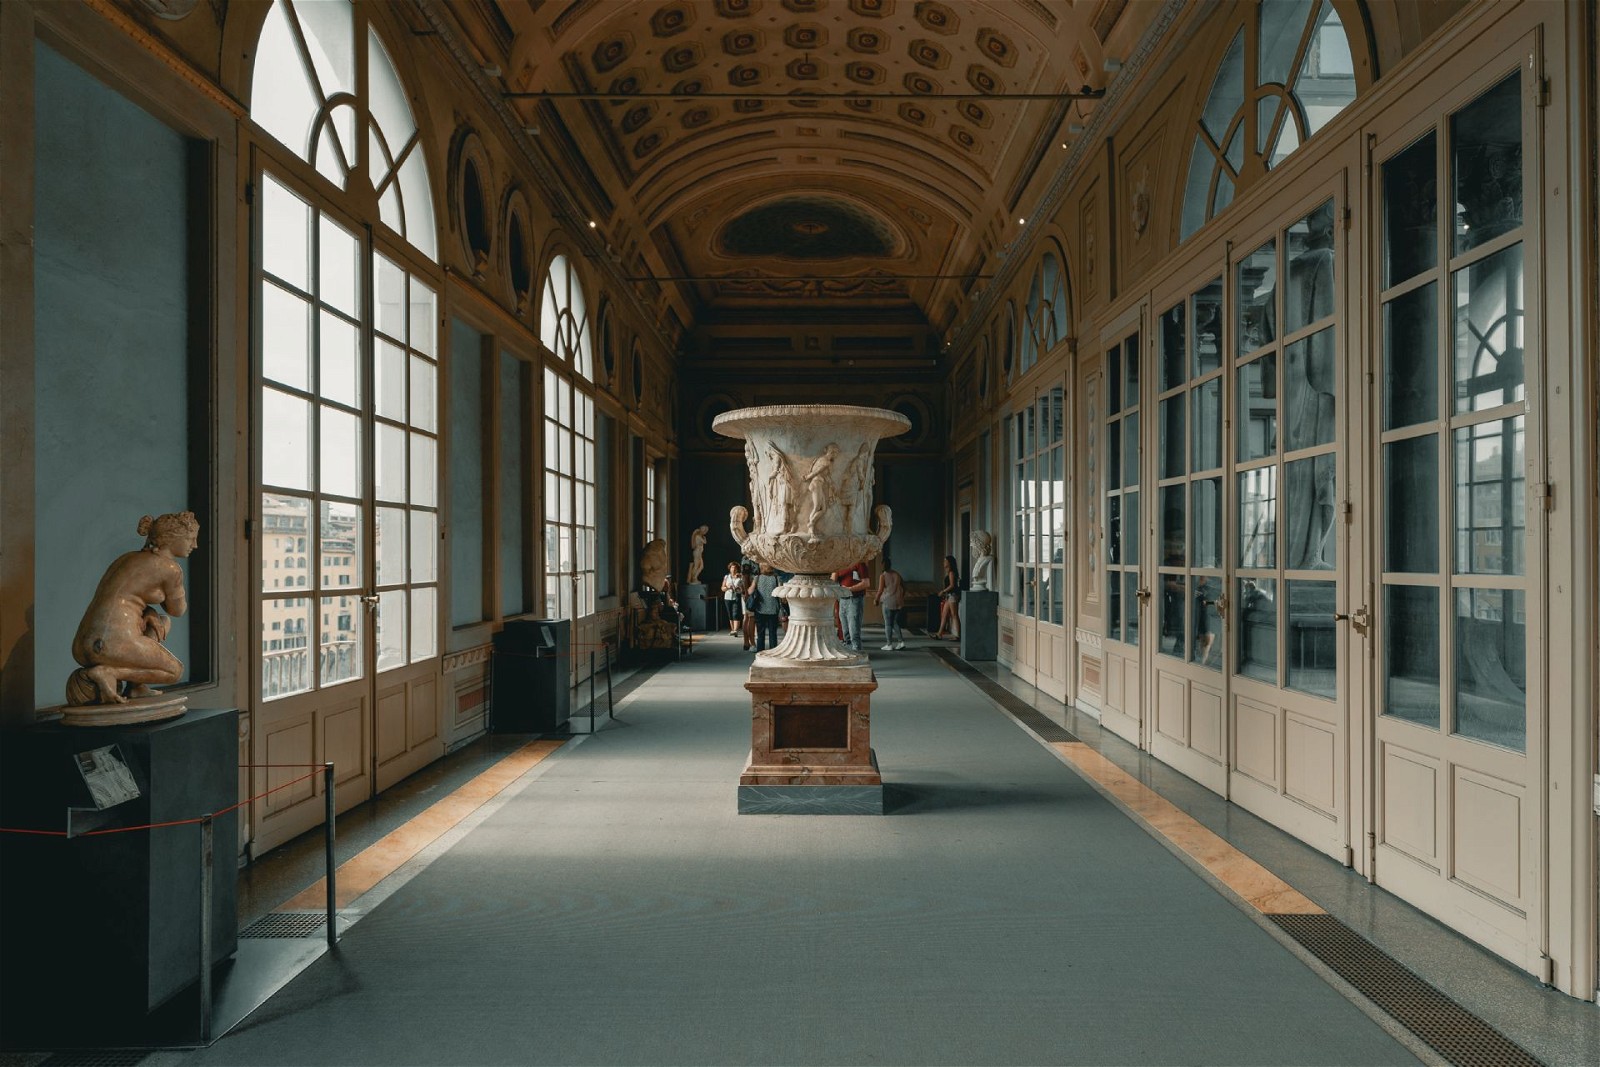 Here is the most famous art gallery in Florence: Uffizi Gallery!